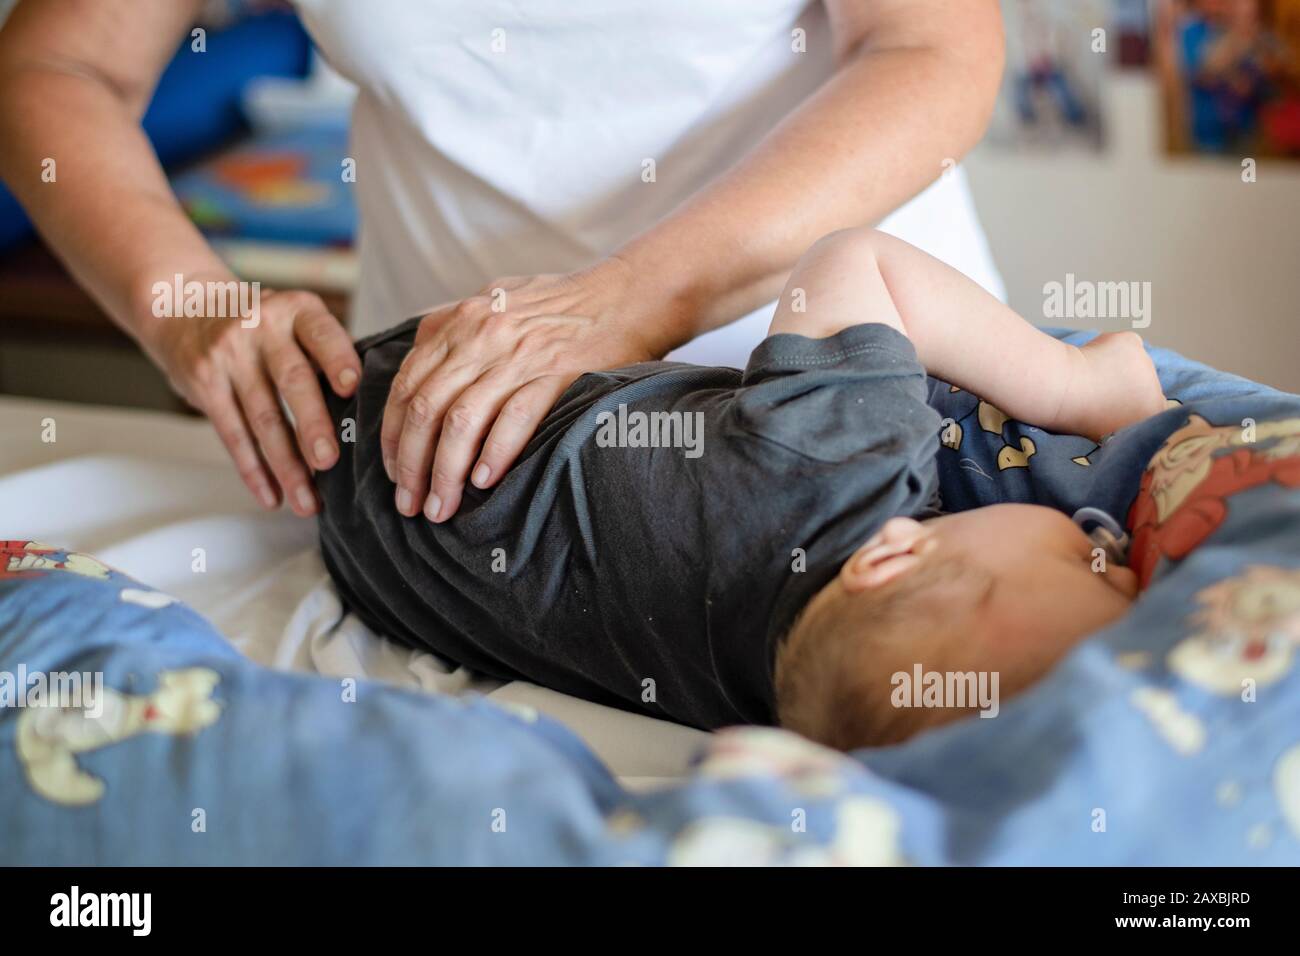 Baby having massage in a rehabilitation centre. Little child on therapy. Massage therapist massaging a baby patient. Stock Photo